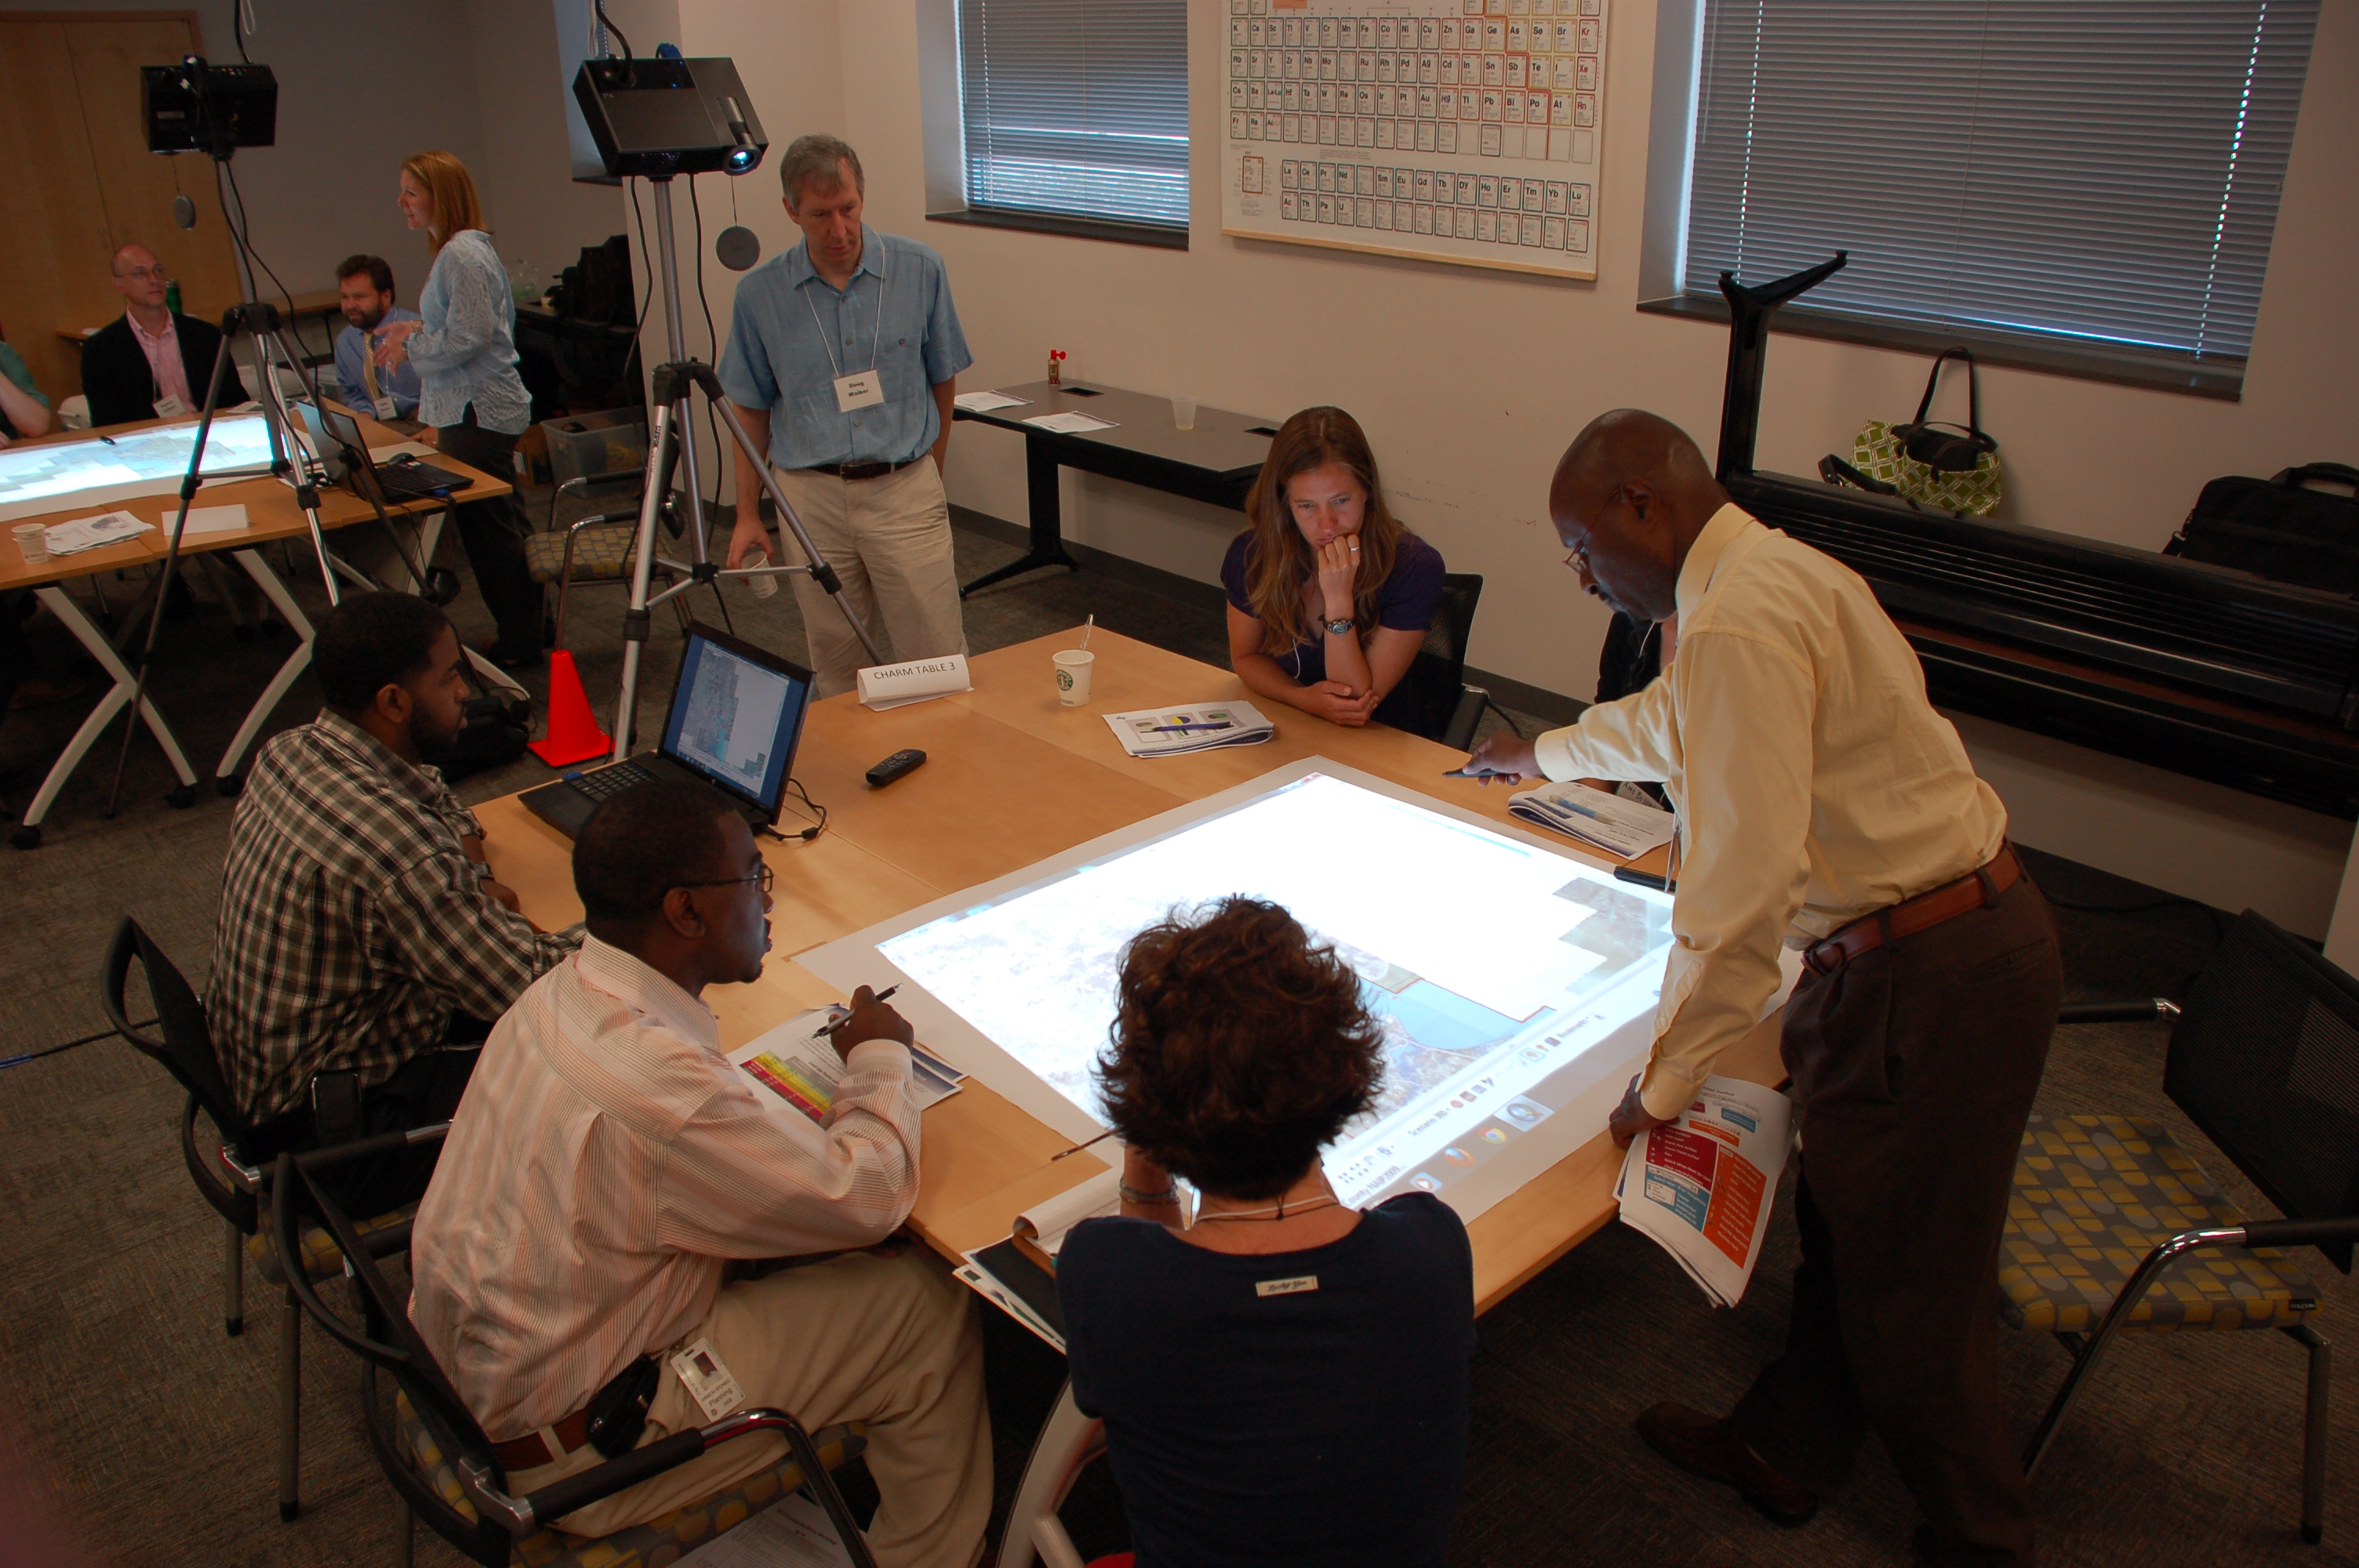 Participants gather around a projected map on a table.